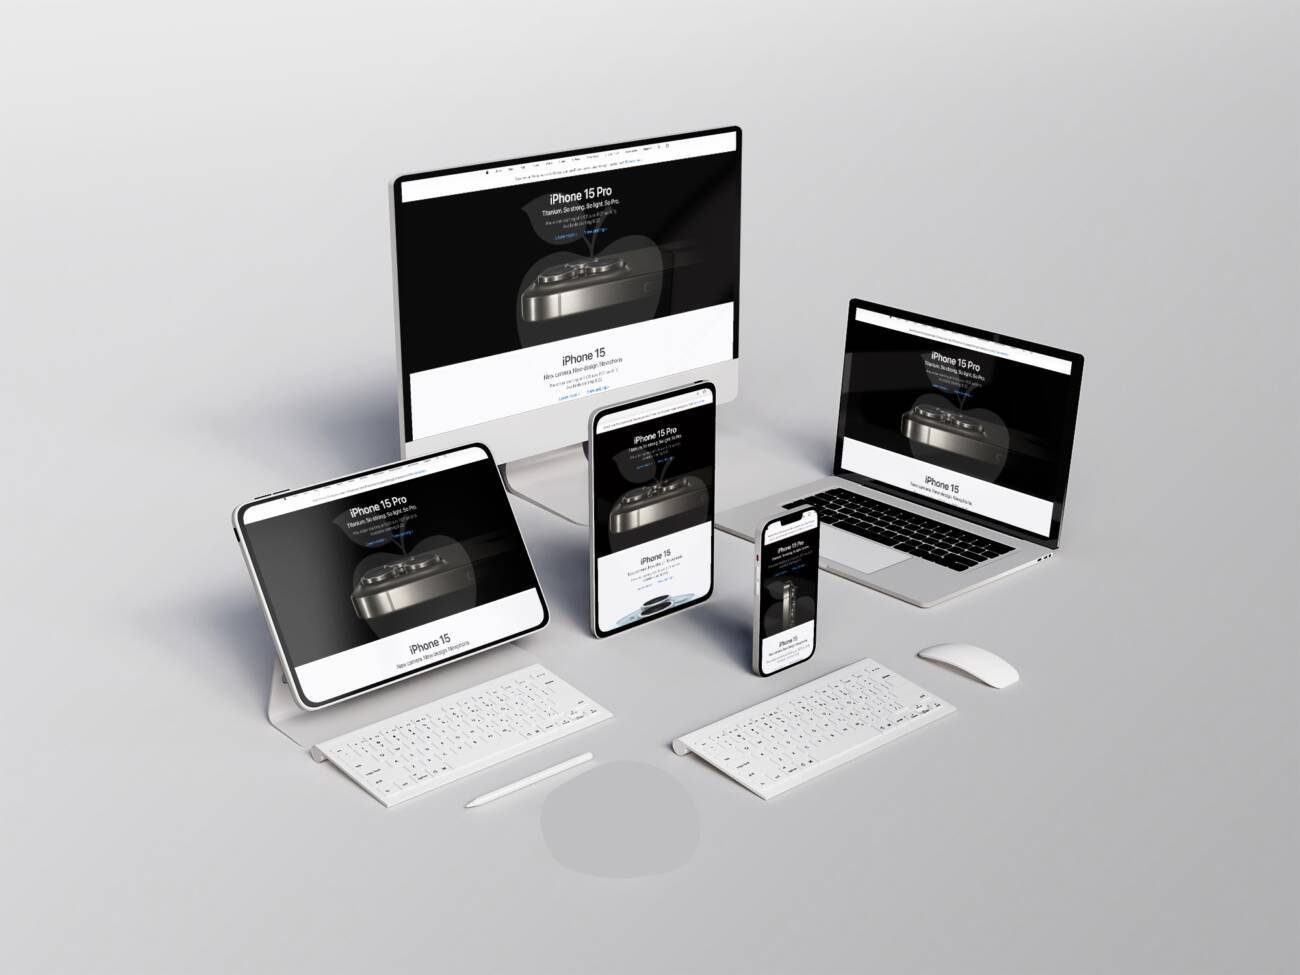 desktop, laptop, and mobile devices with the Apple website featuring the iphone 15 displaying on their screens